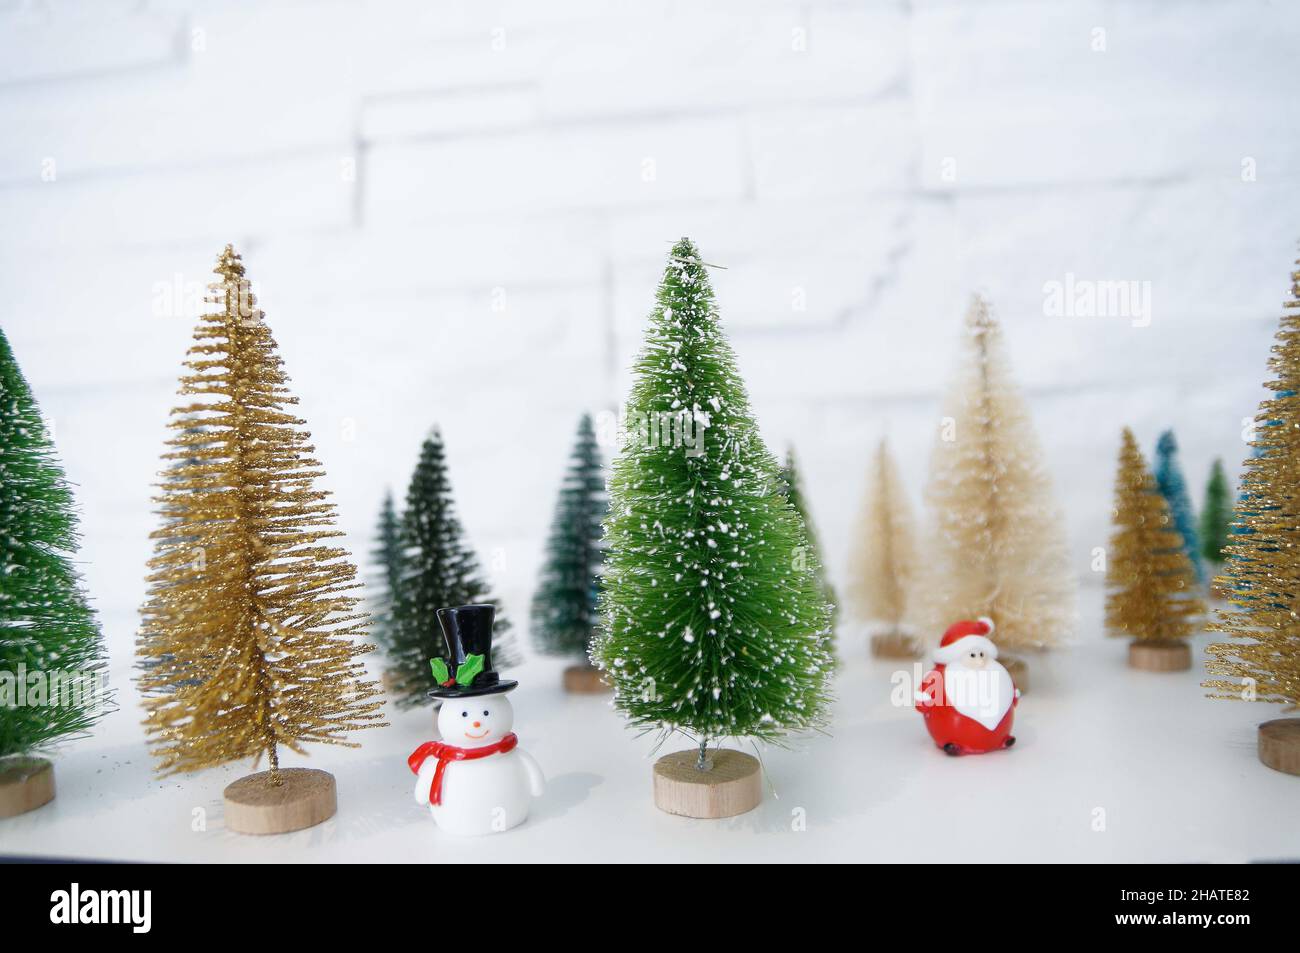 Christmas decoration with figurines Stock Photo